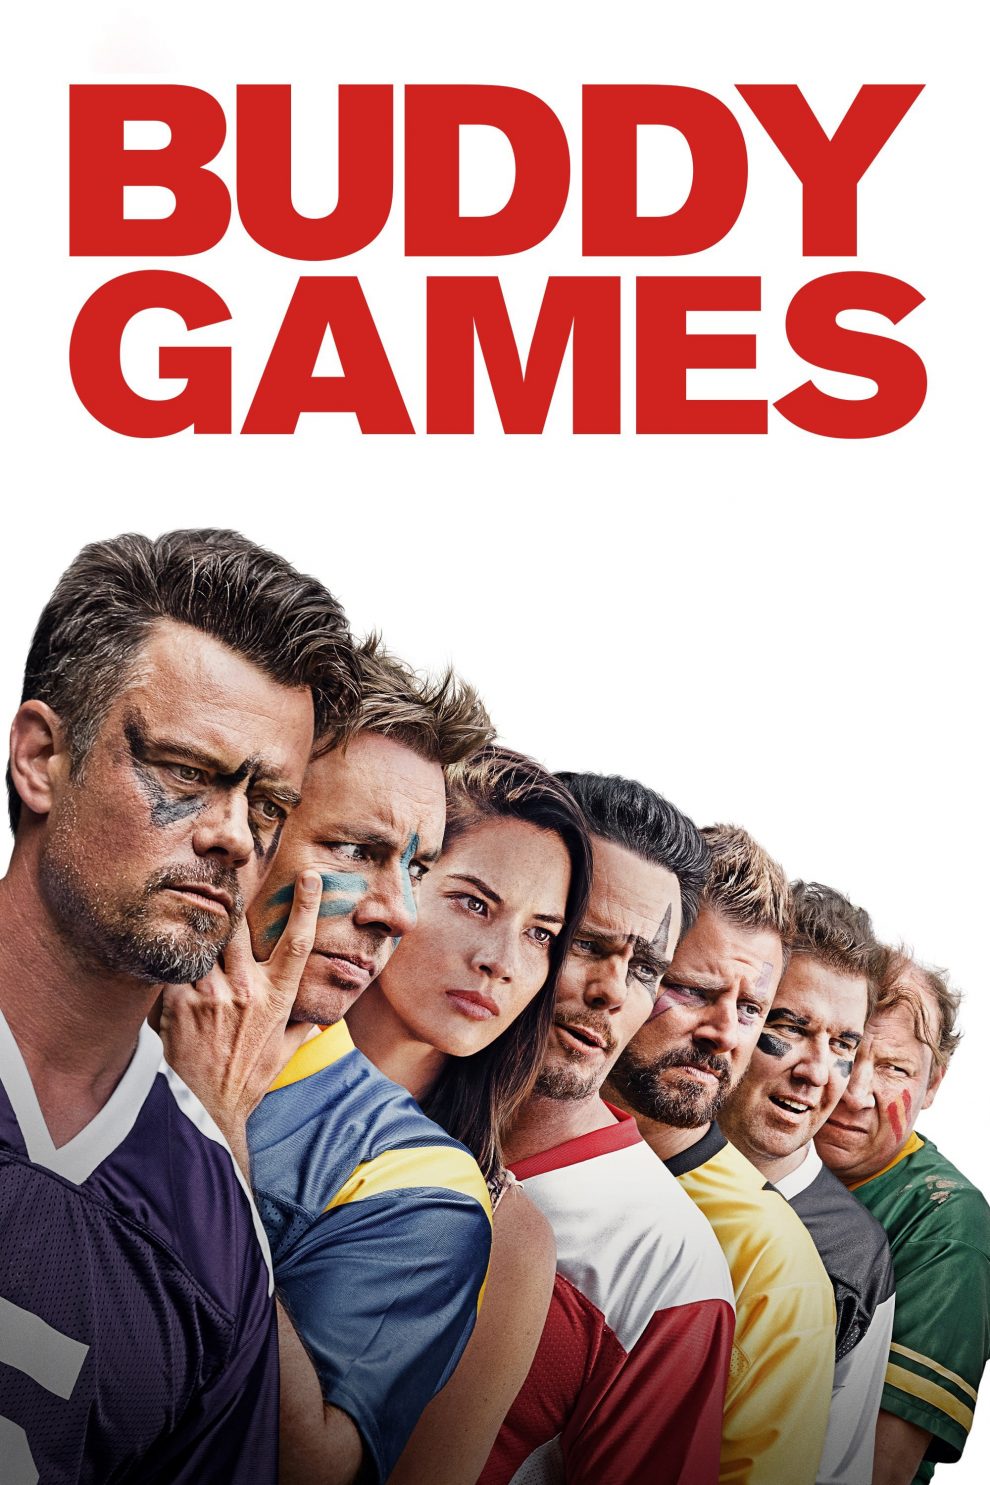 Poster for the movie "Buddy Games"